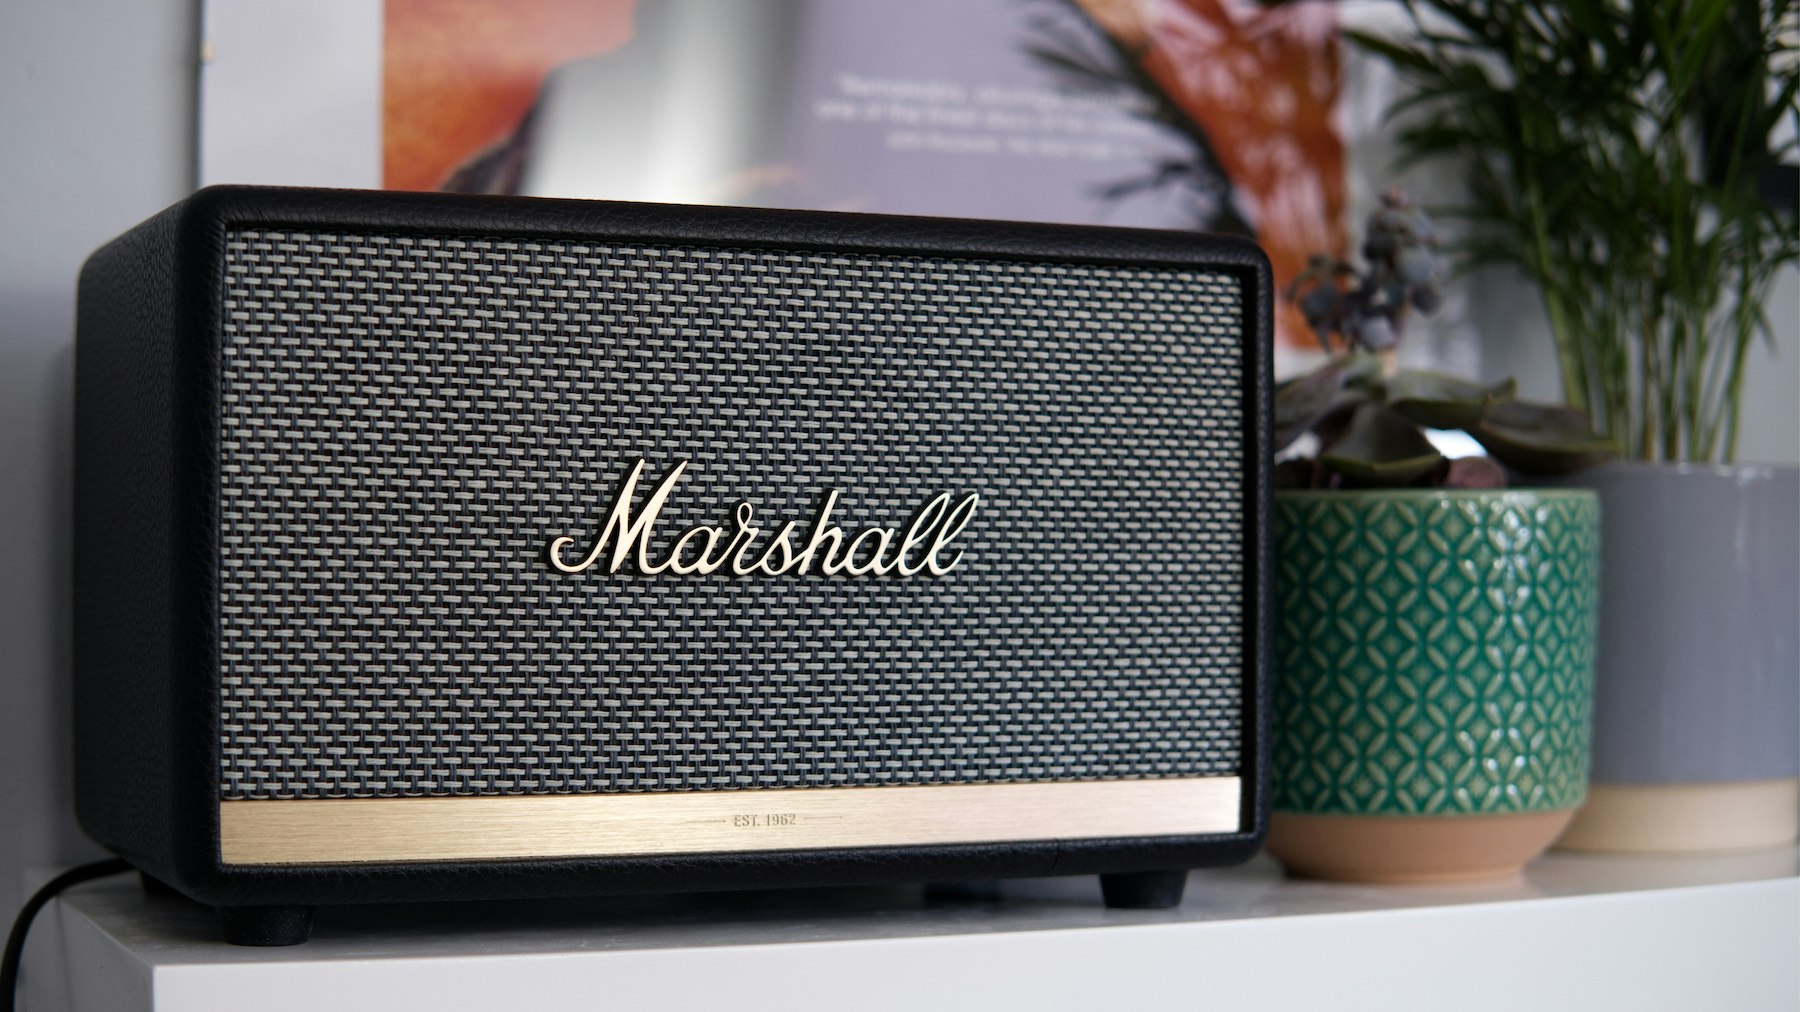 Marshall Action 2 vs Stanmore 2 Wireless Bluetooth Portable Speaker